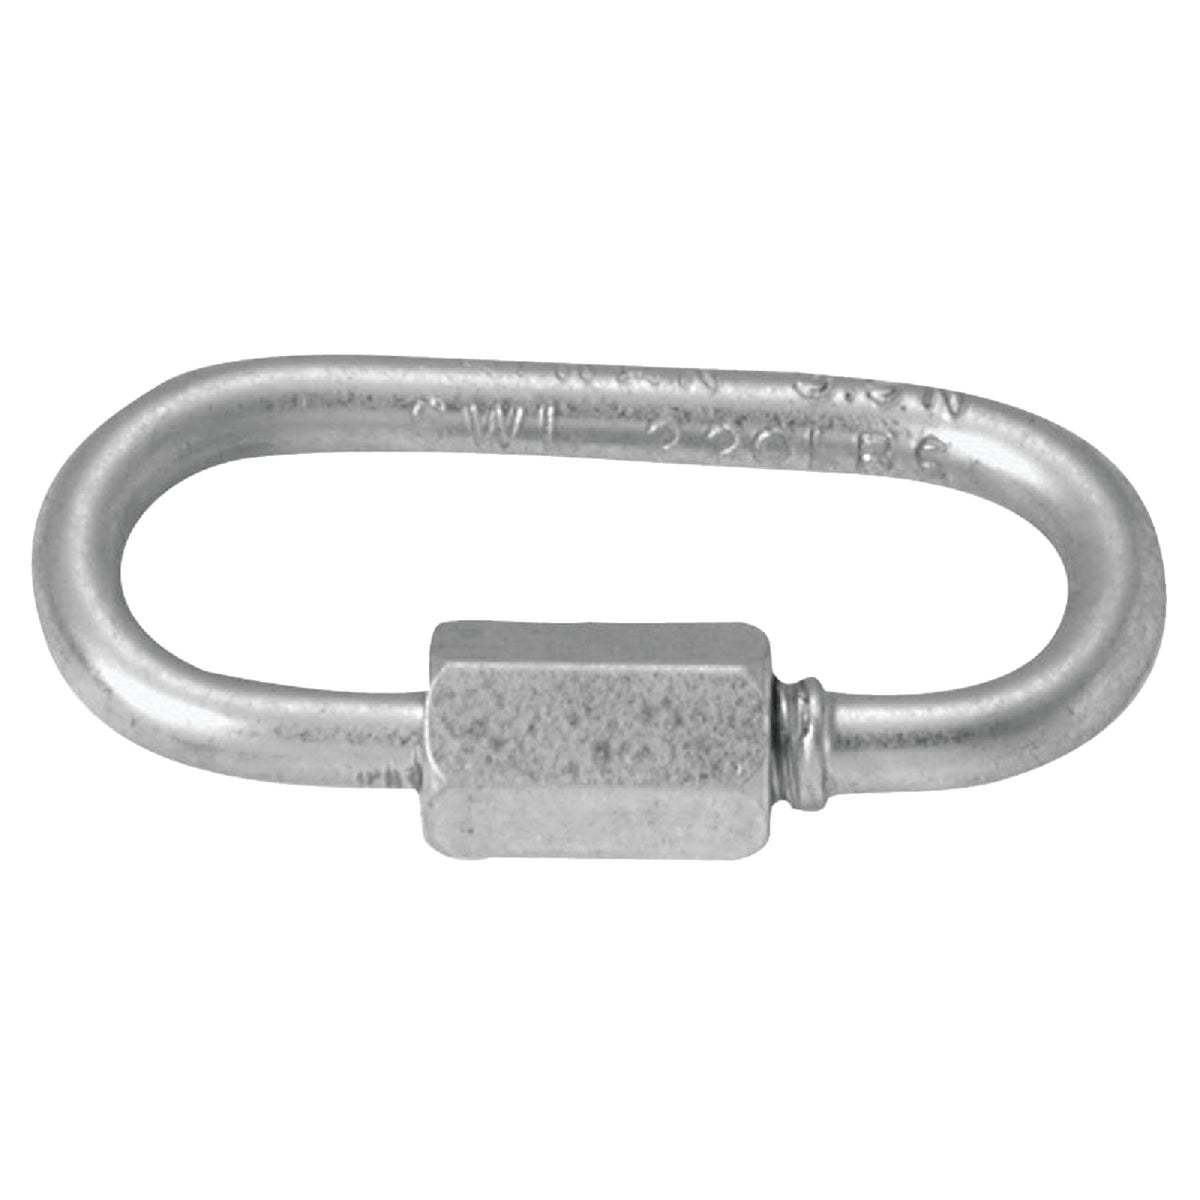 Campbell 5/16 In. Zinc-Plated Steel Quick Link